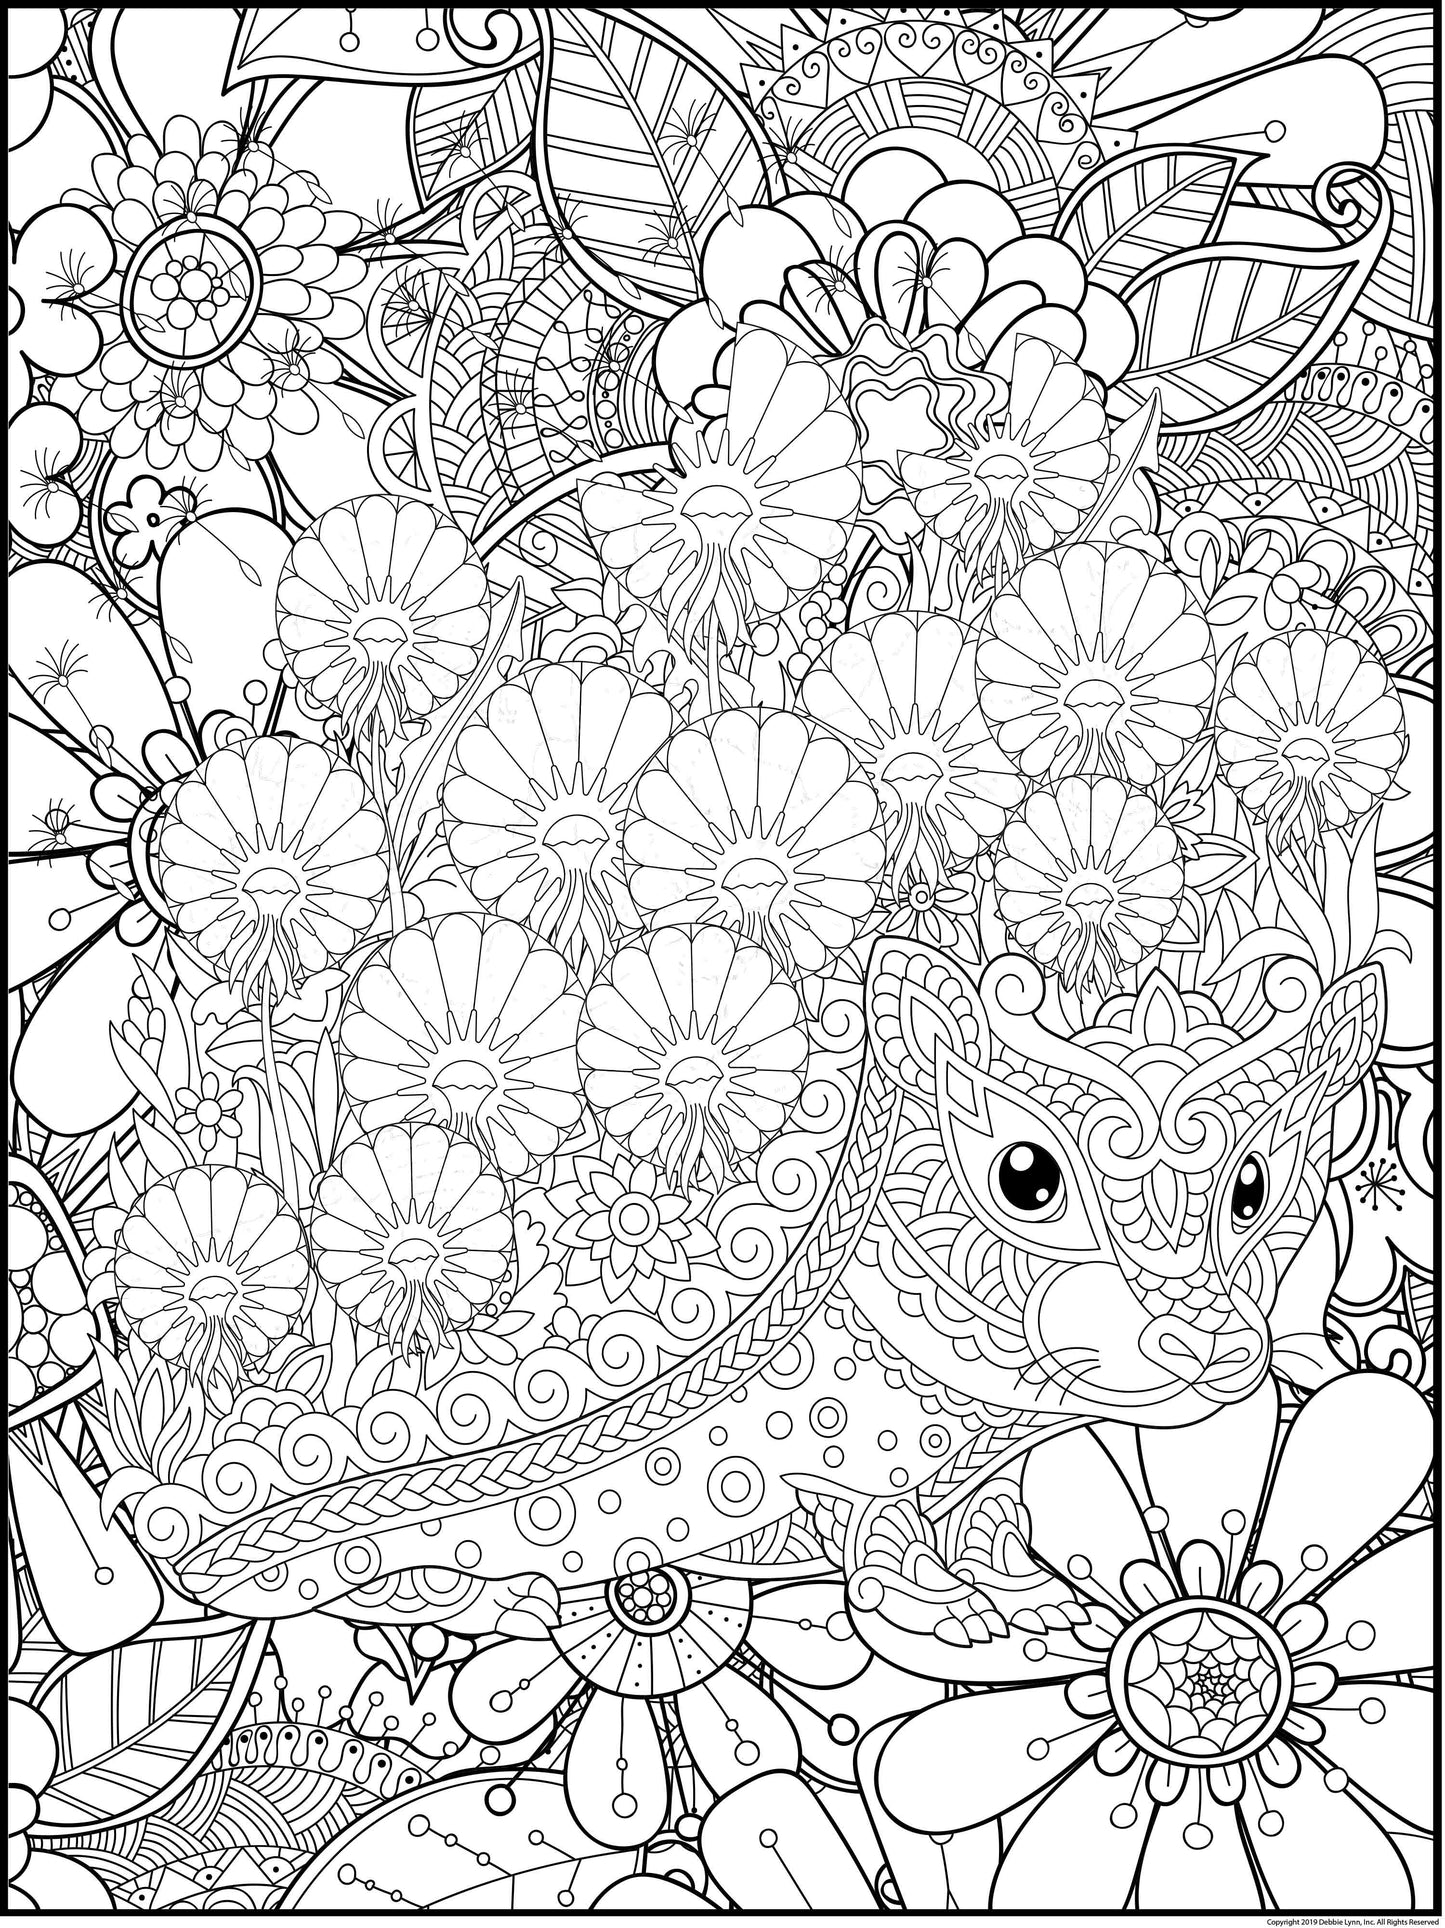 Hedgehog Personalized Giant Coloring Poster 46"x60"